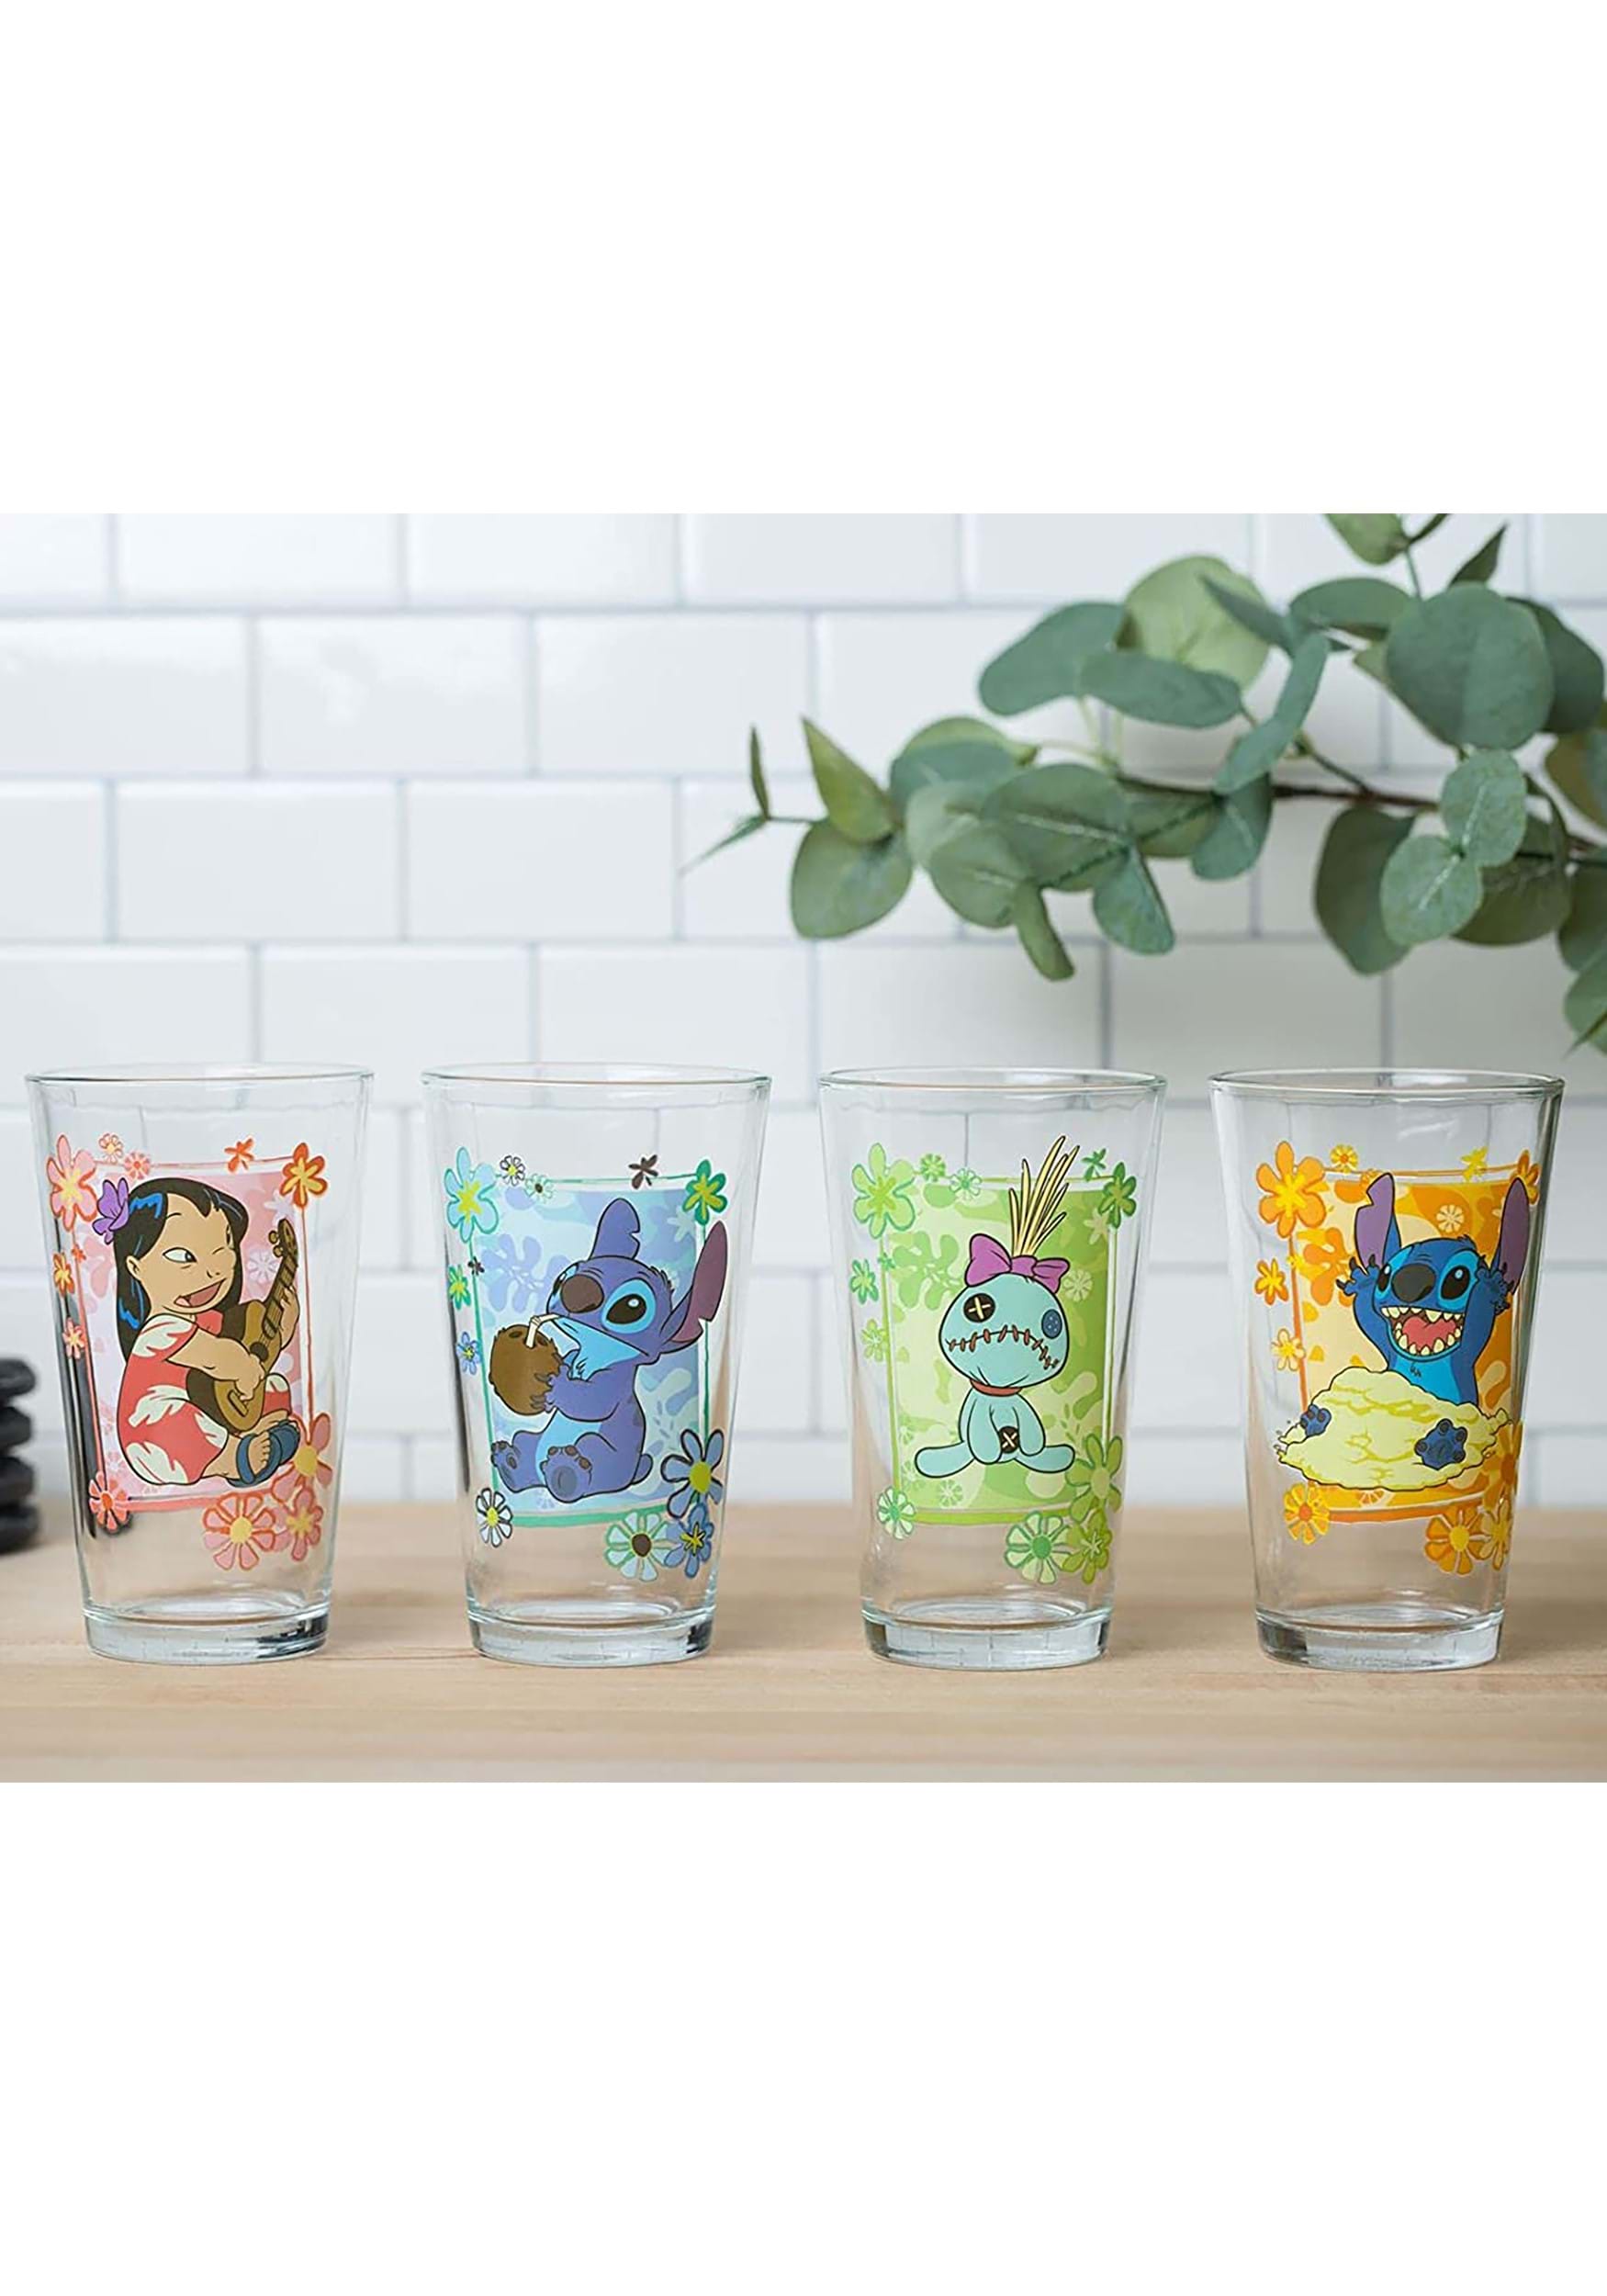 https://images.fun.com/products/75045/2-1-259359/4-pc-lilo-and-stich-tropical-glass-set-alt-4.jpg